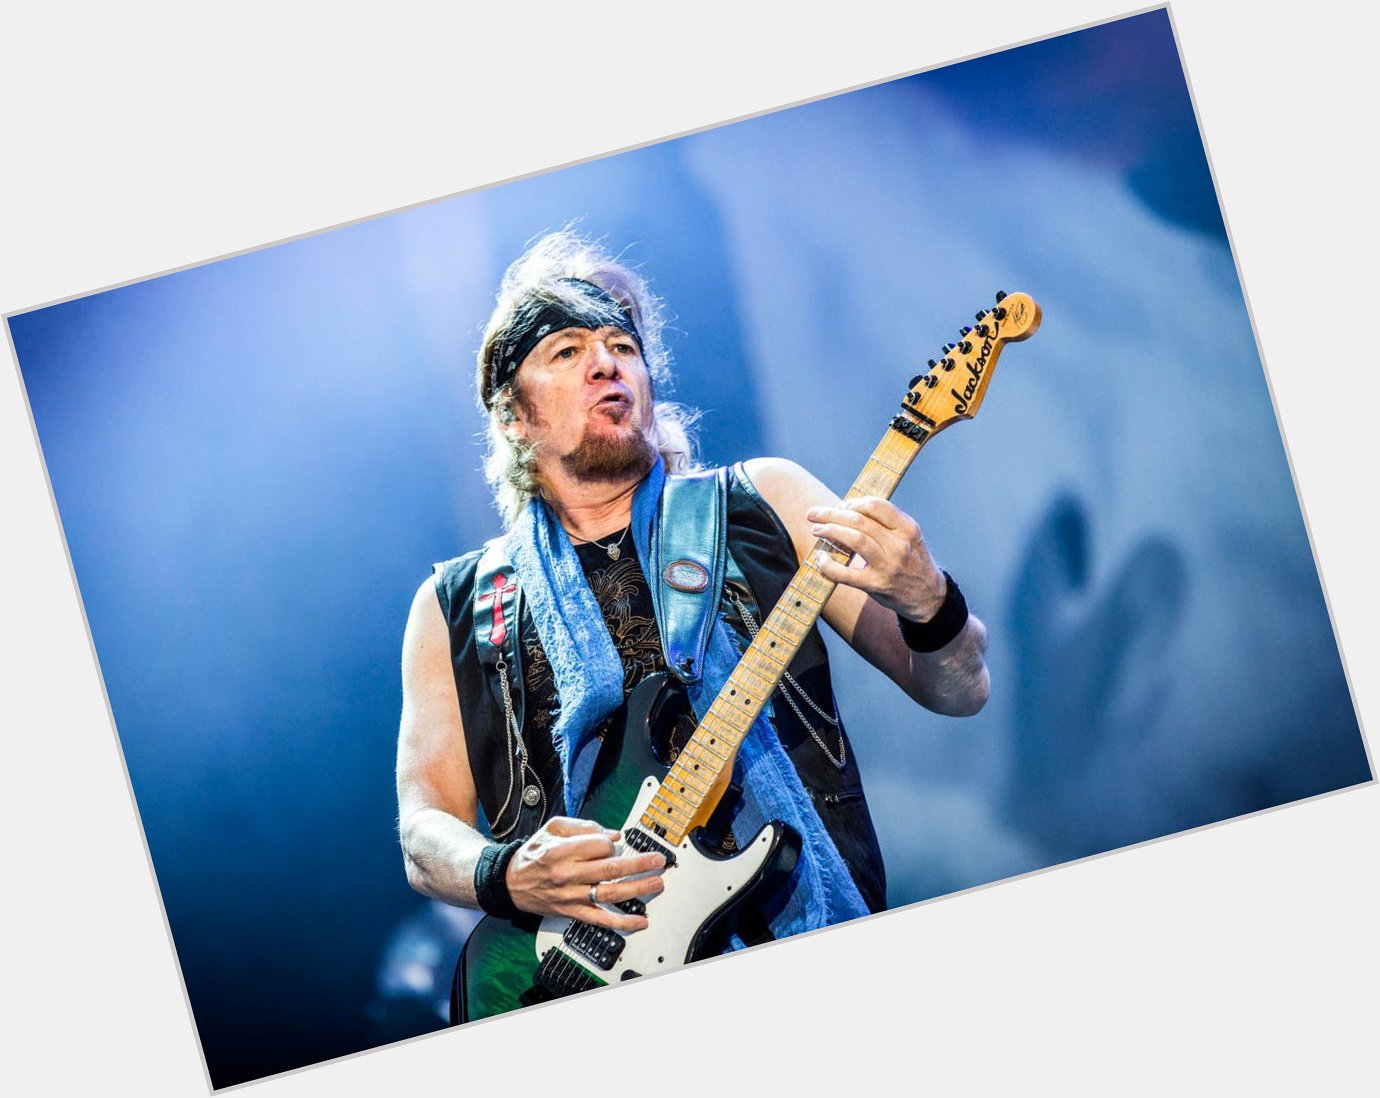 Happy birthday to one of the greatest of all time. 

Mr. Adrian Smith  